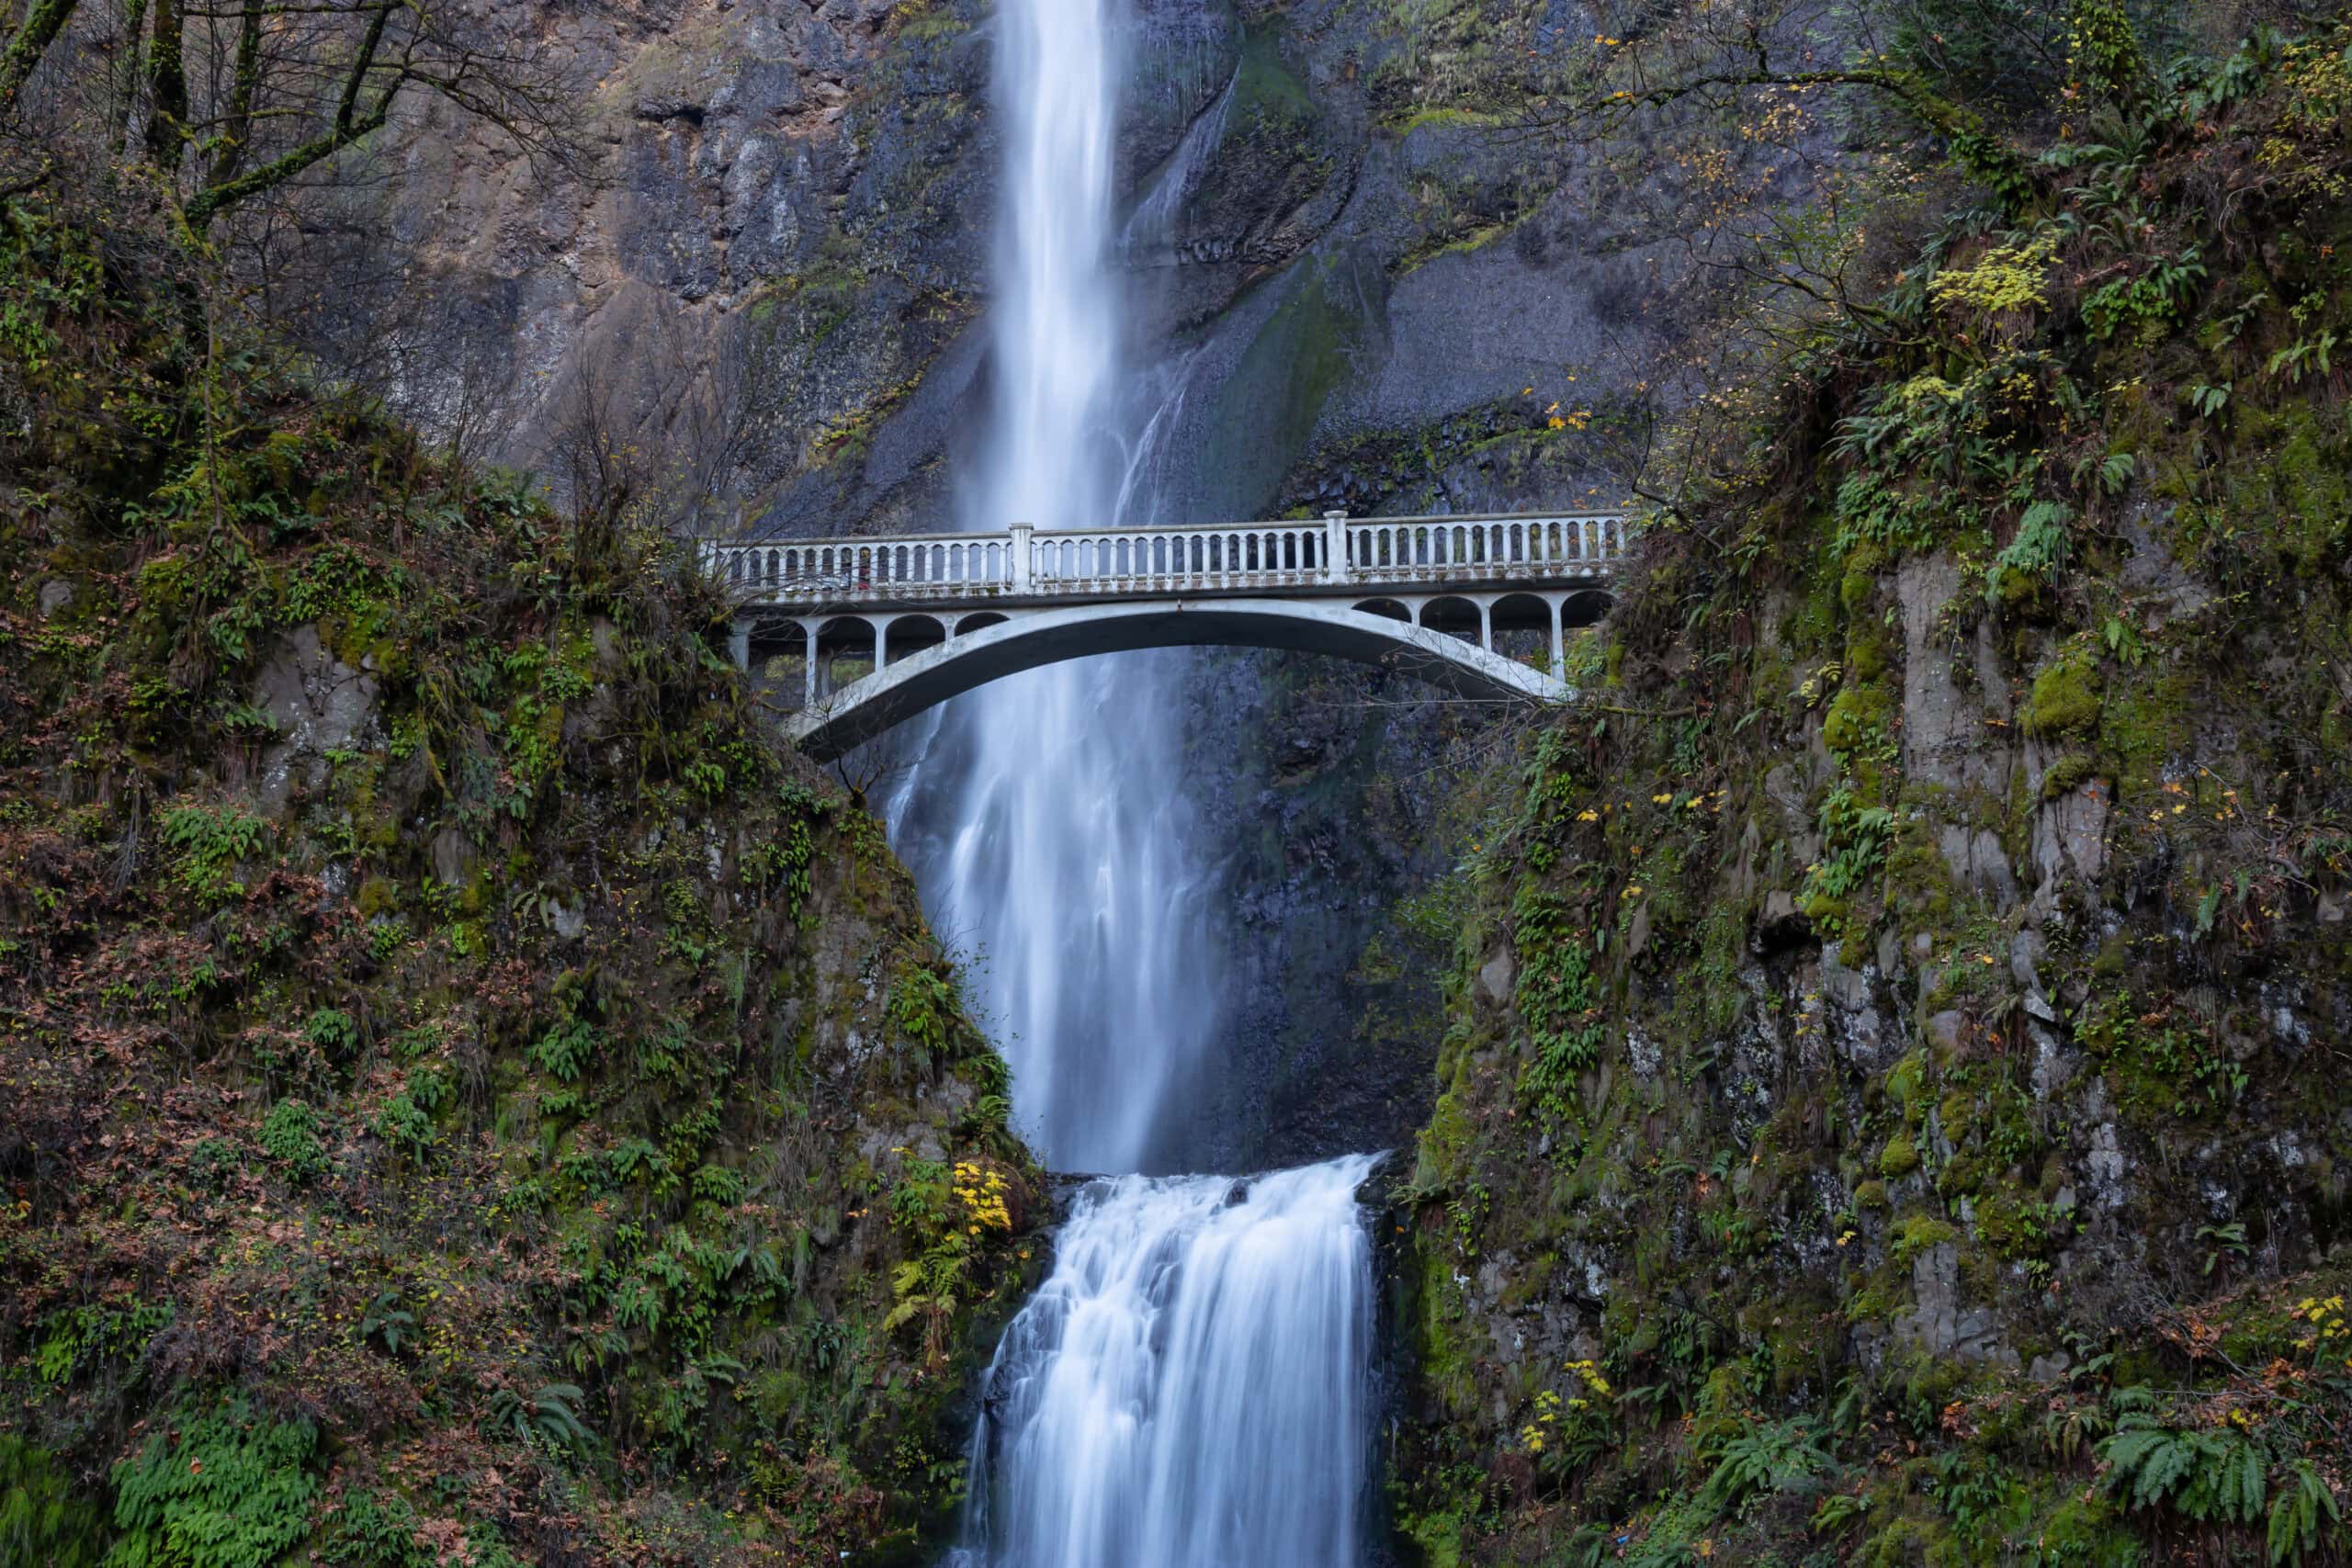 <p>Cascading down an impressive 620 feet, Multnomah Falls is one of the most iconic and easily accessible waterfalls in the Columbia River Gorge. This two-tiered marvel, fed by underground springs from Larch Mountain, offers sweeping views from the historic Benson Bridge, which spans the lower falls. </p> <p>A visit to Multnomah Falls is a perfect summer adventure, combining astonishing natural beauty with rich cultural history, all just a short drive from Portland. Whether you’re a seasoned hiker or a photography enthusiast, this majestic waterfall is a must-see on your summer travel list.</p>